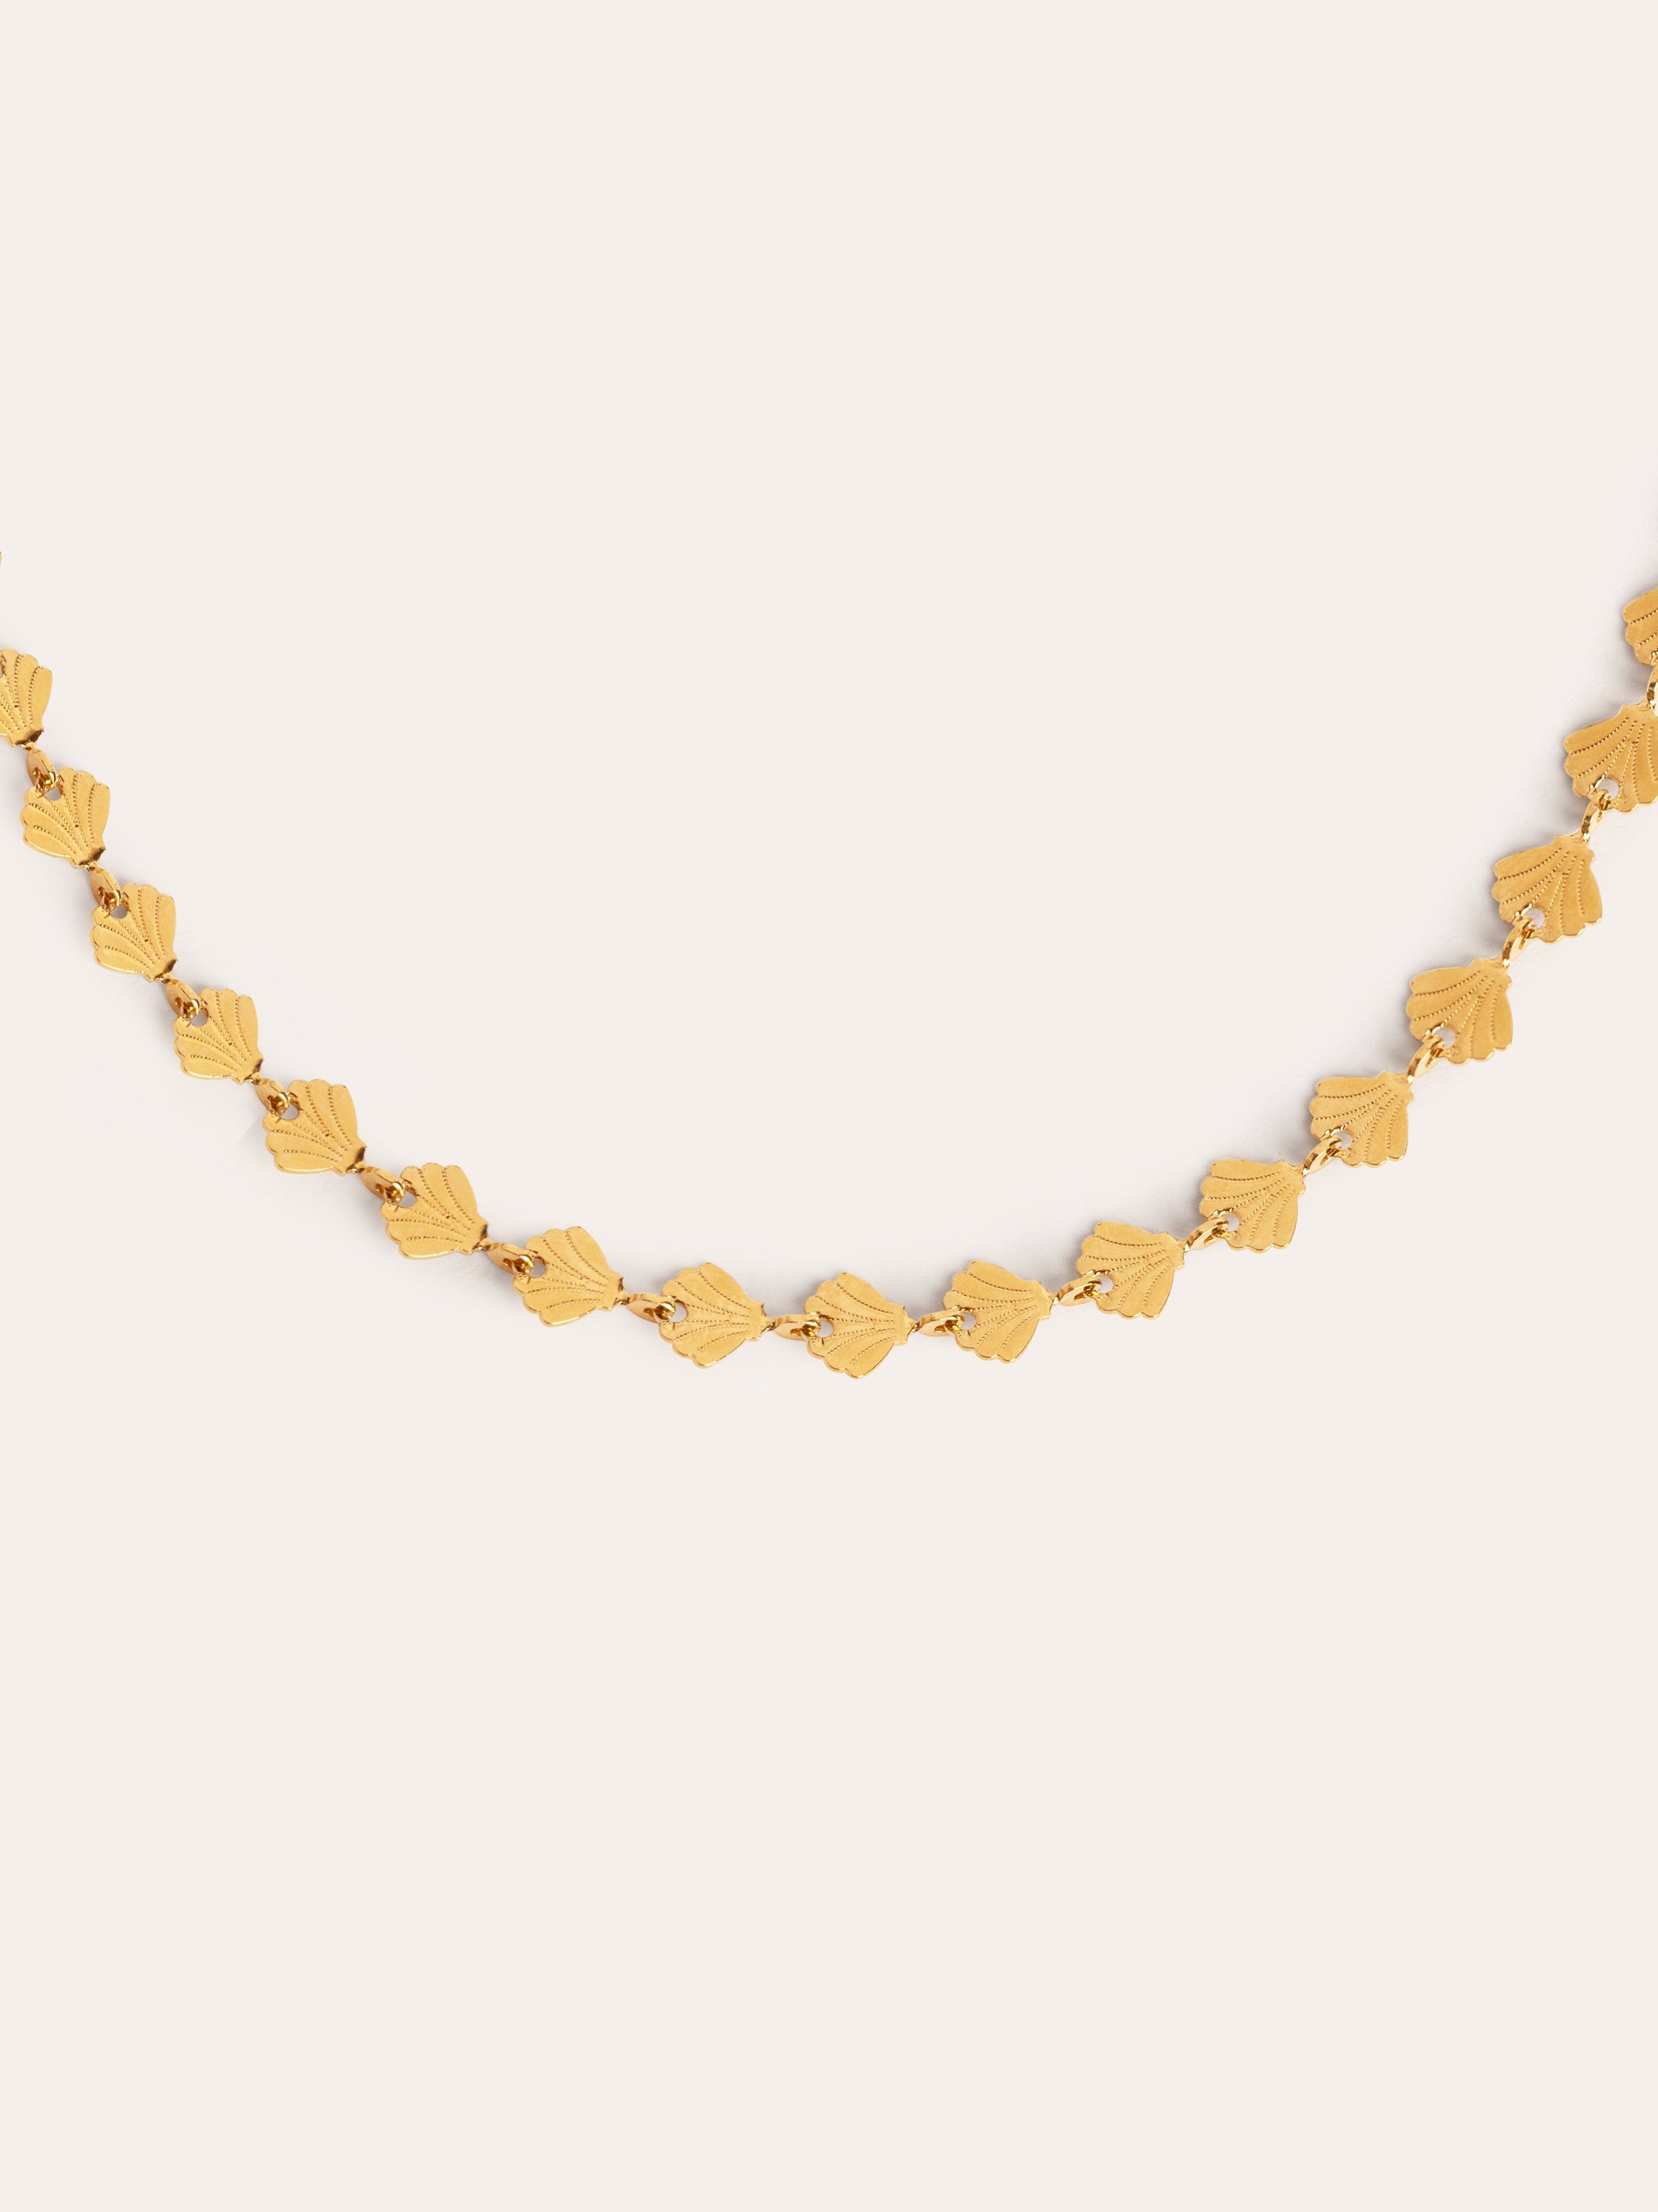 Shells Gold Necklace